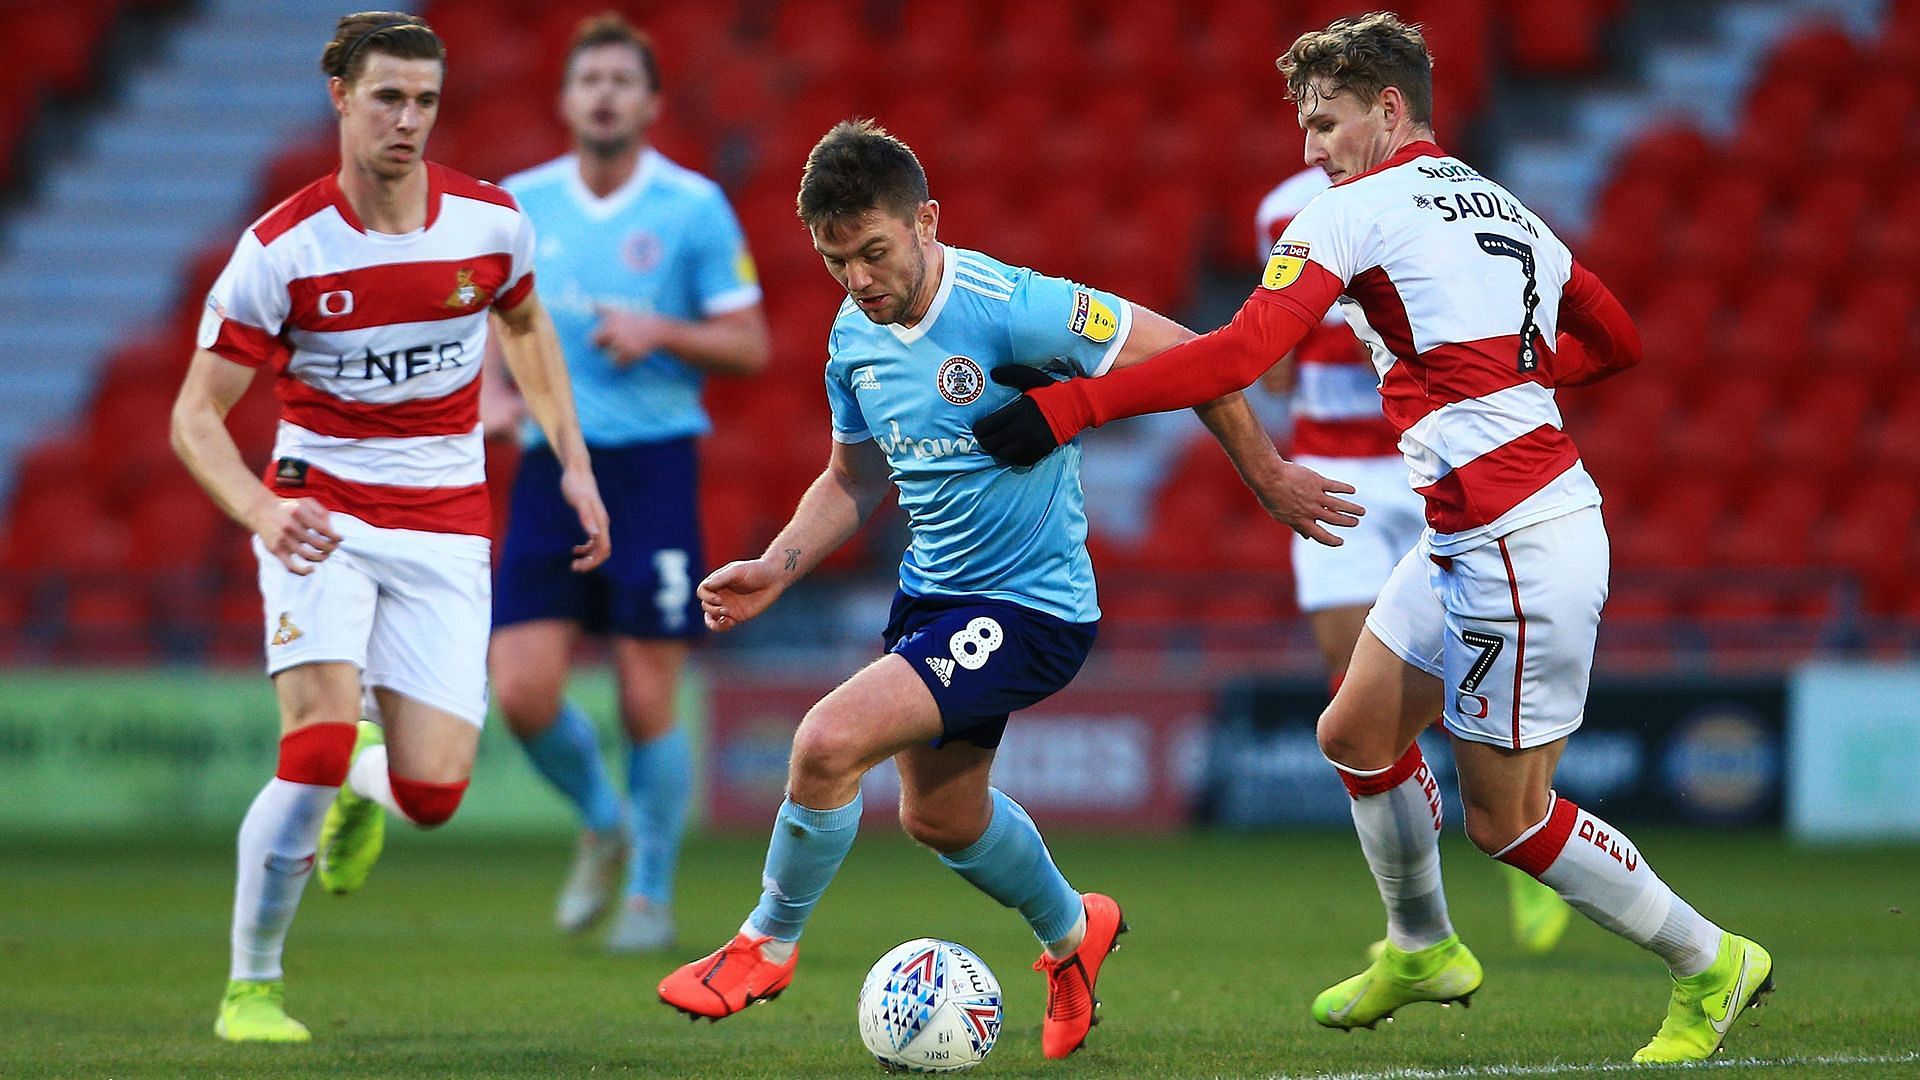 A crucial victory for Doncaster against Accrington Stanley in EFL League One.